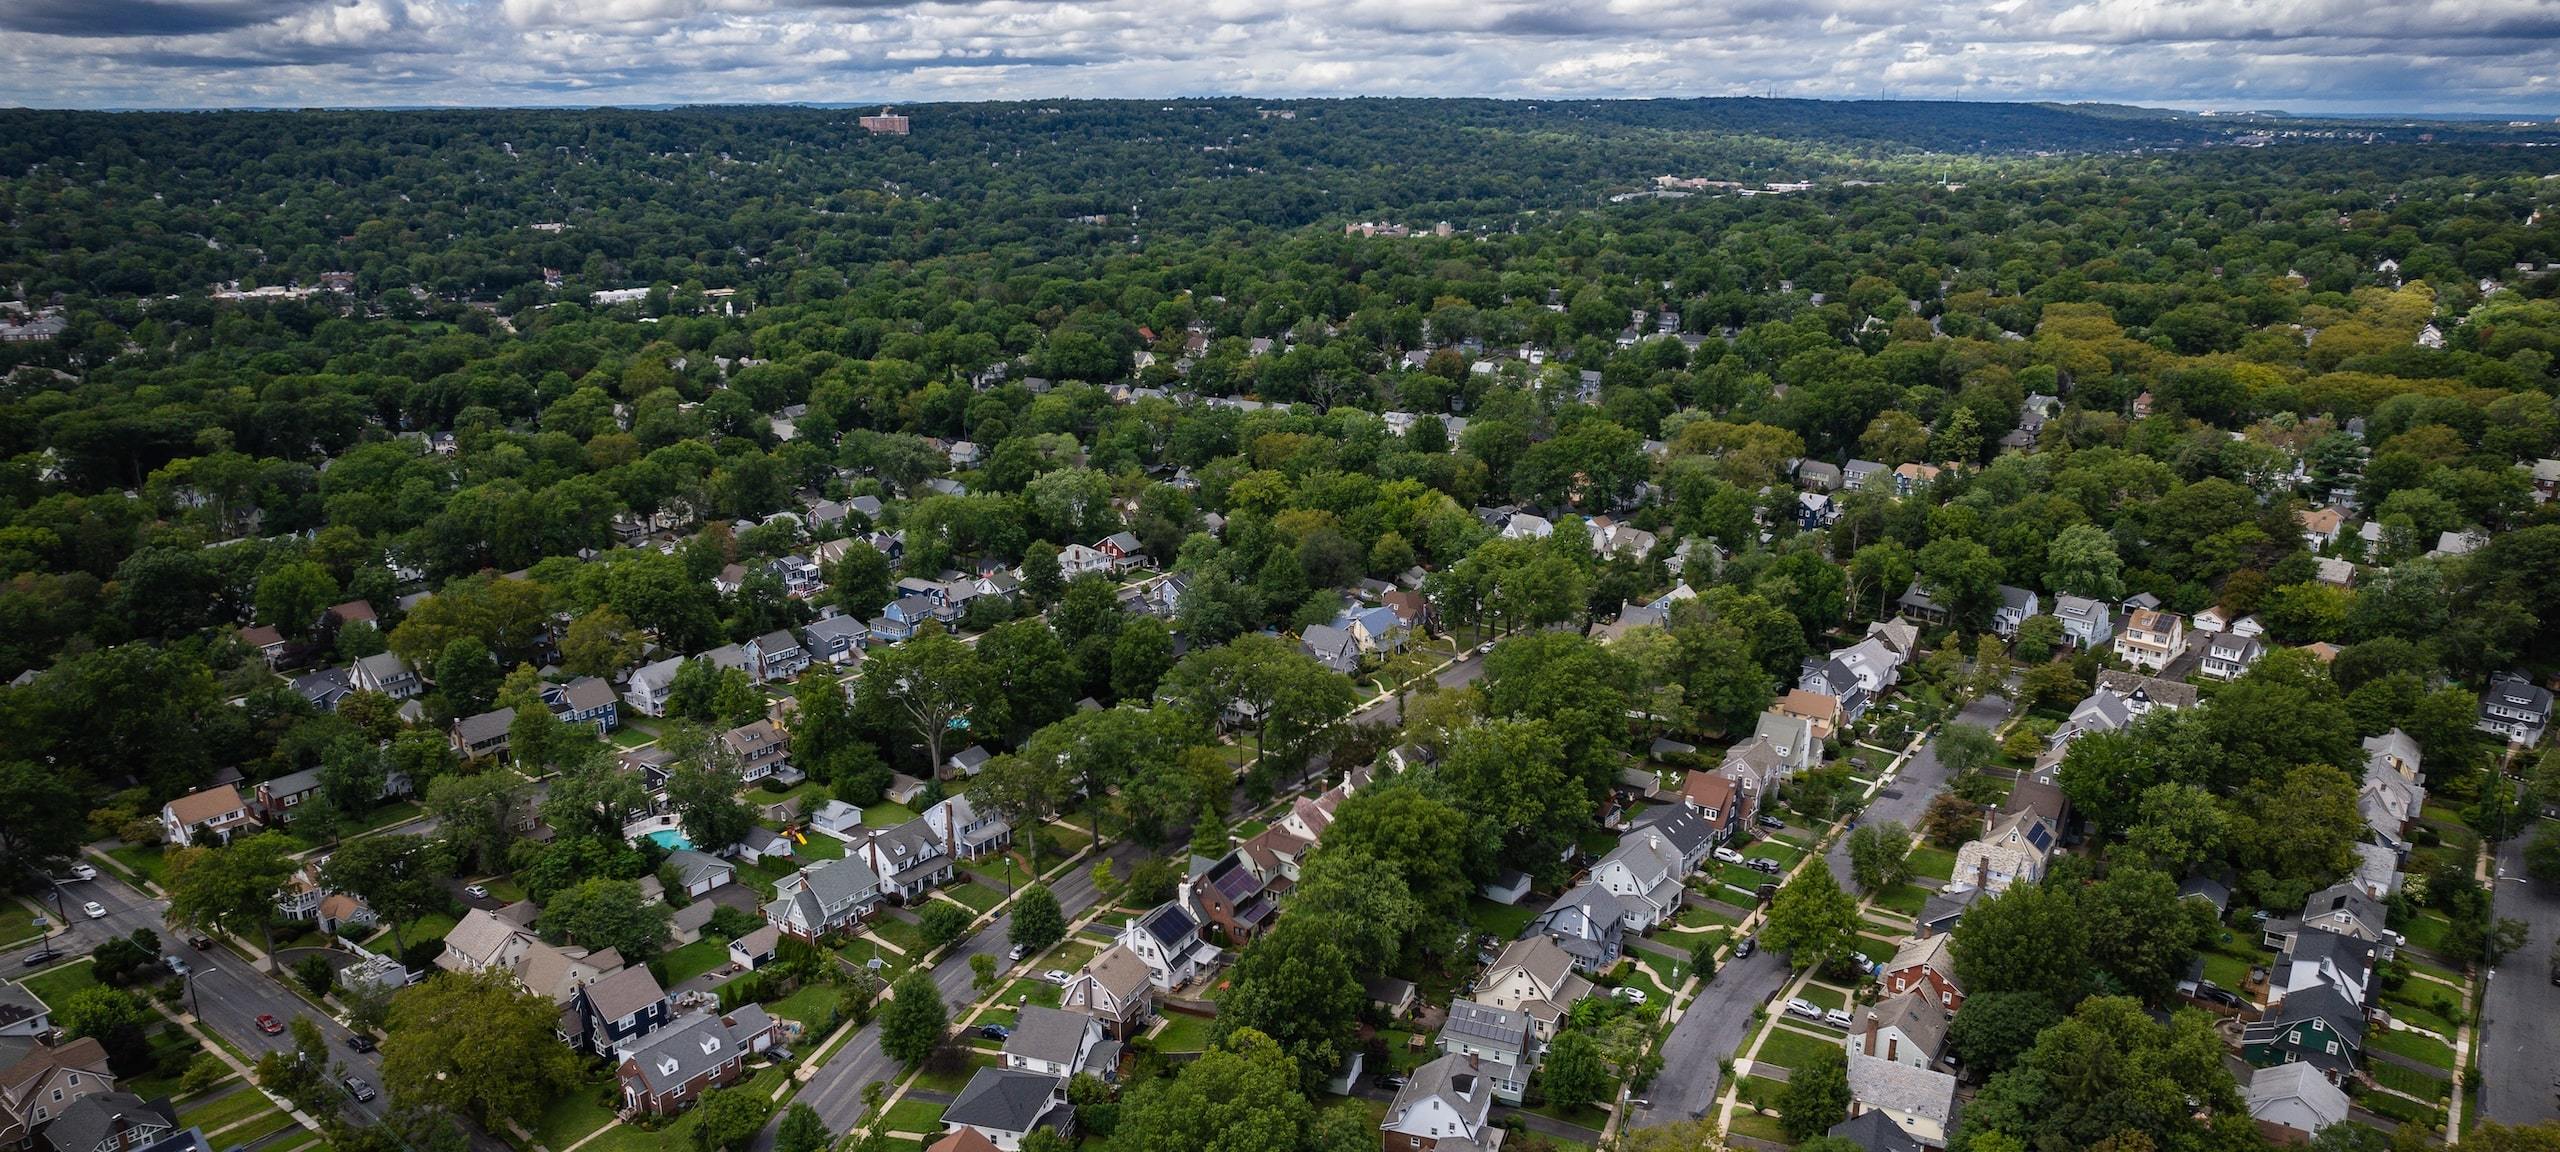 Aerial view of residential neighborhood in Maplewood, New Jersey